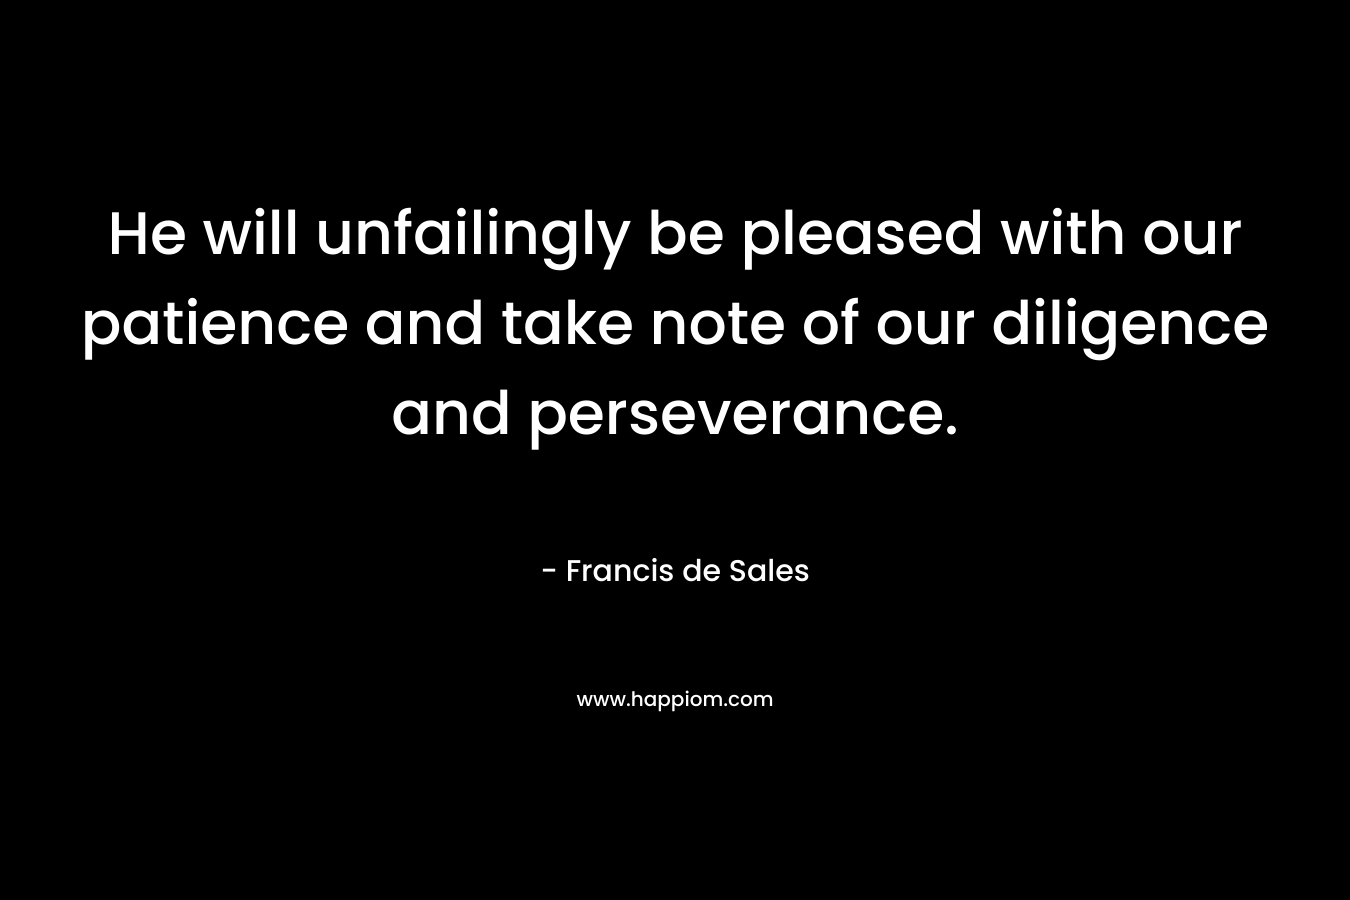 He will unfailingly be pleased with our patience and take note of our diligence and perseverance. – Francis de Sales